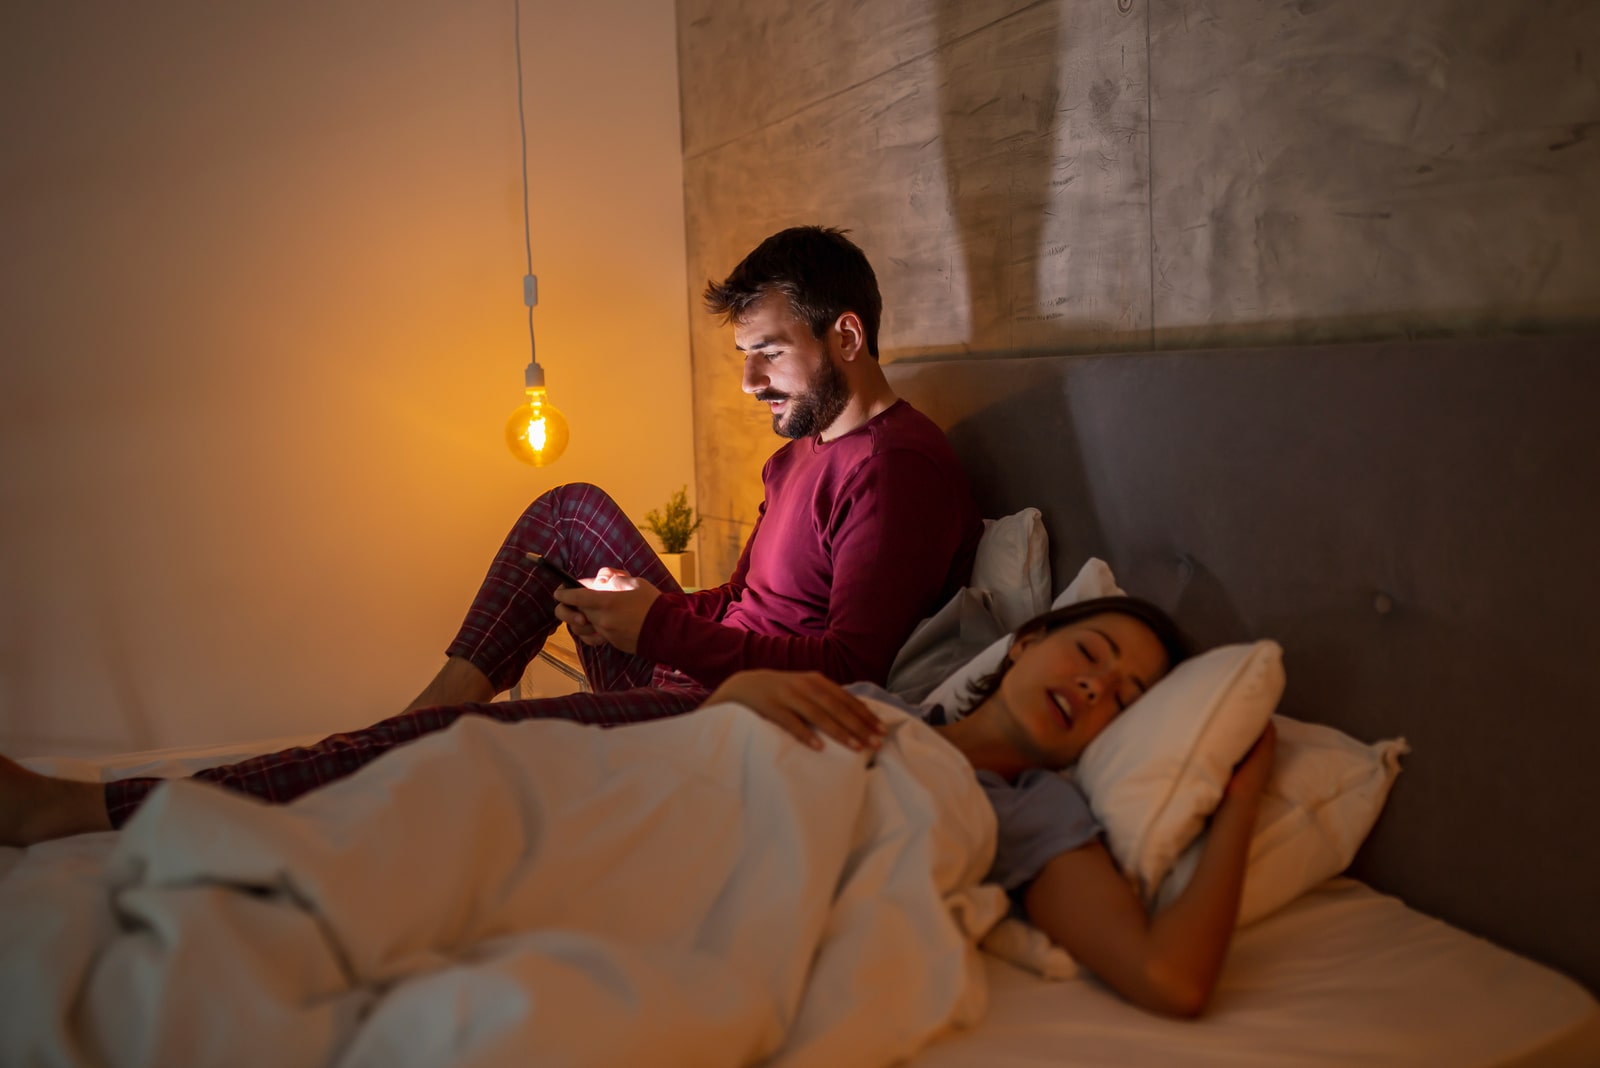 a man in bed uses a smartphone while his girlfriend sleeps